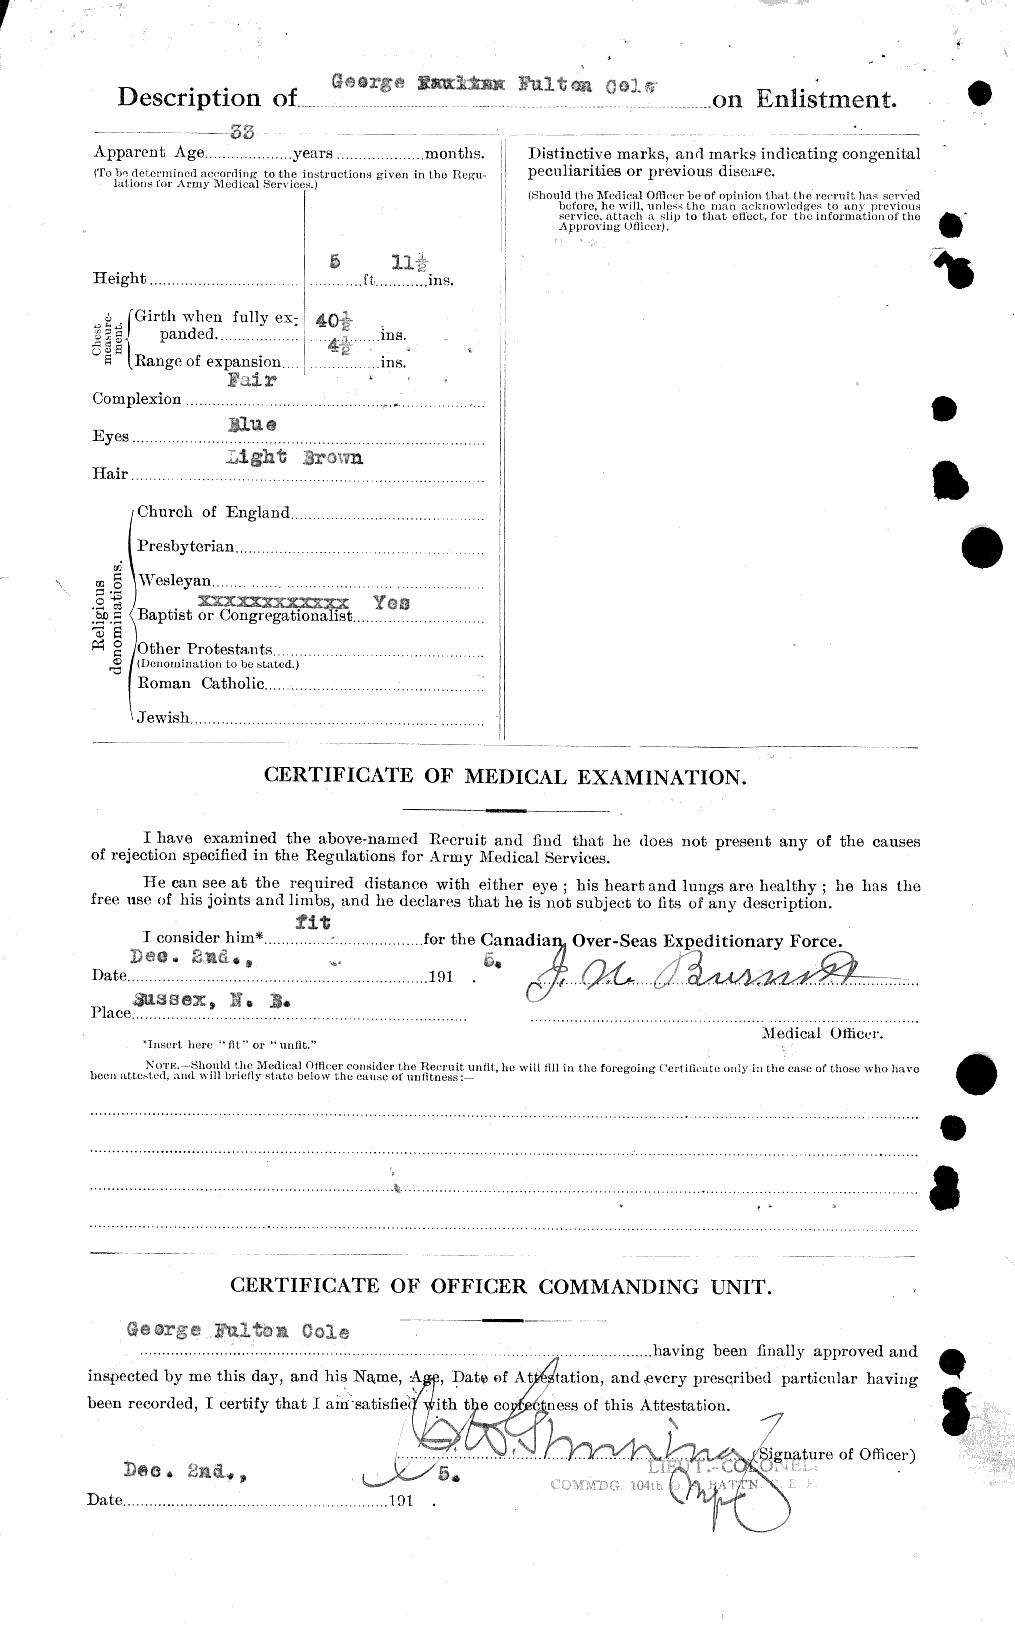 Personnel Records of the First World War - CEF 027765b